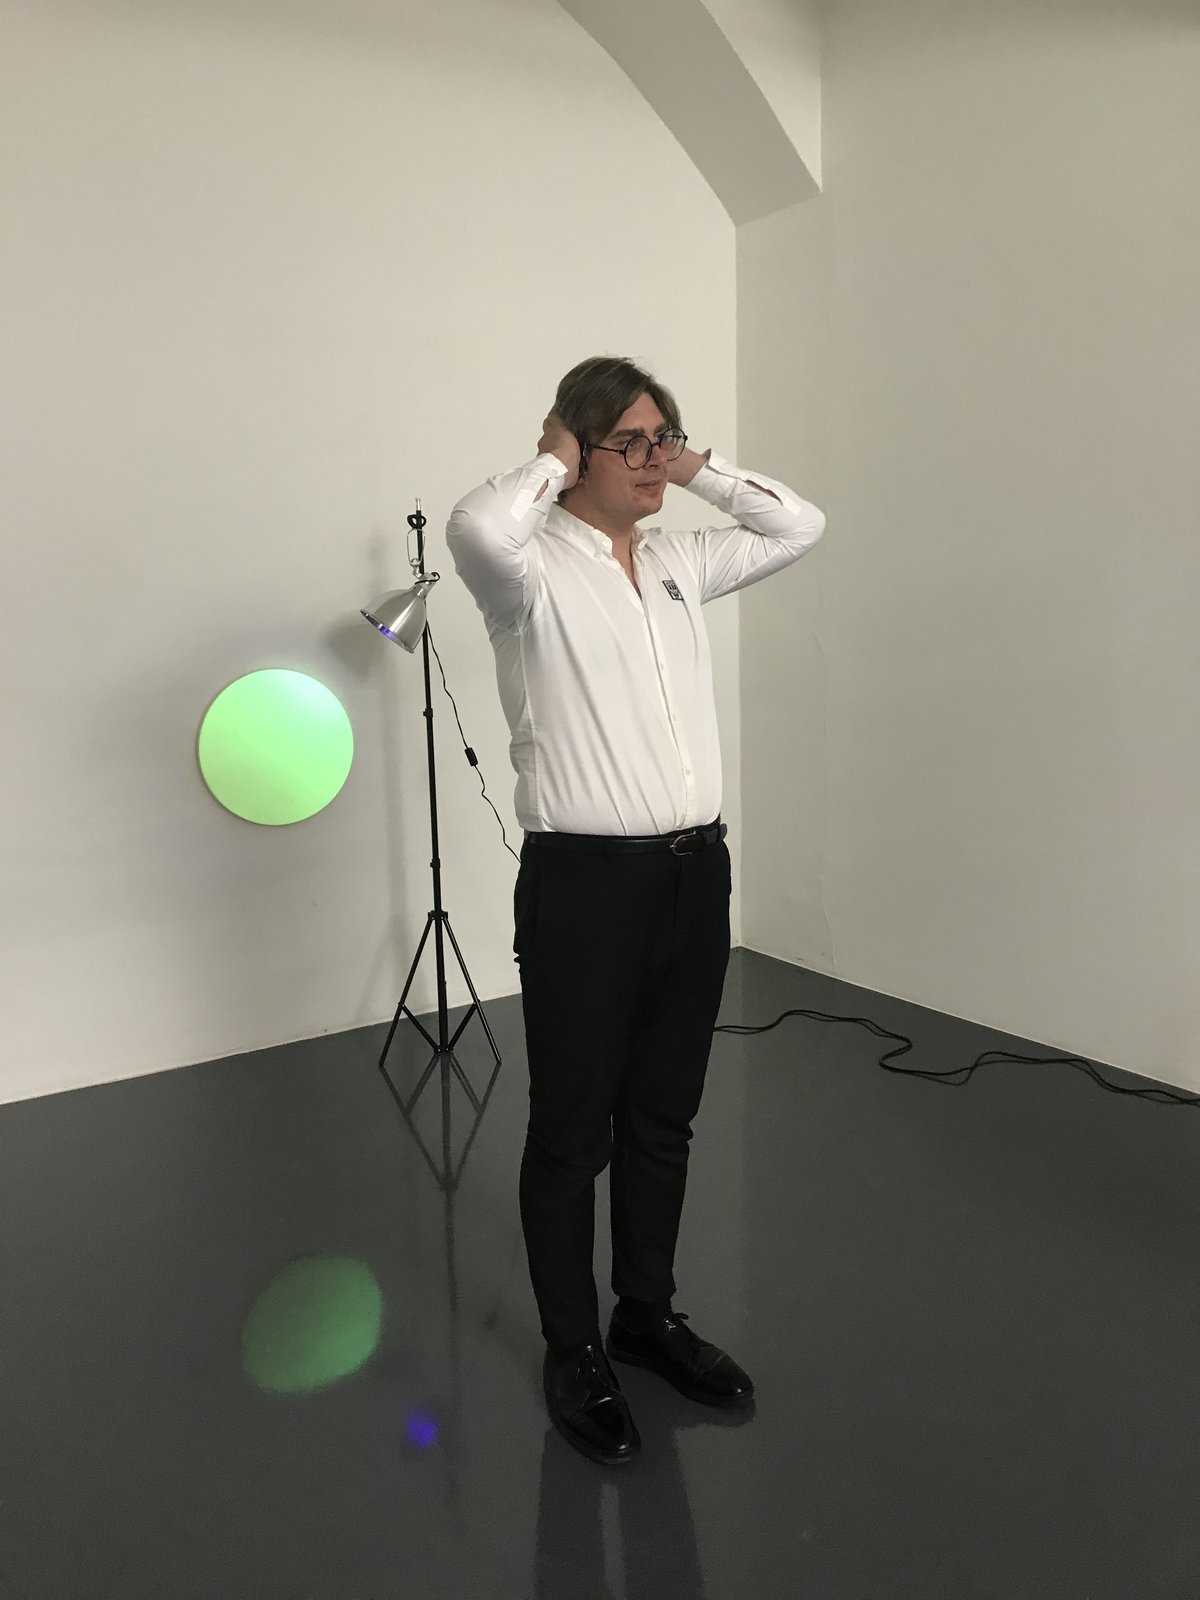 Anna-Sophie BergerTell me what to do, 2021Performance with Audrius Pocius at the Opening of A Sculpture in Search of an AuthorLayr Seilerstaette, Vienna